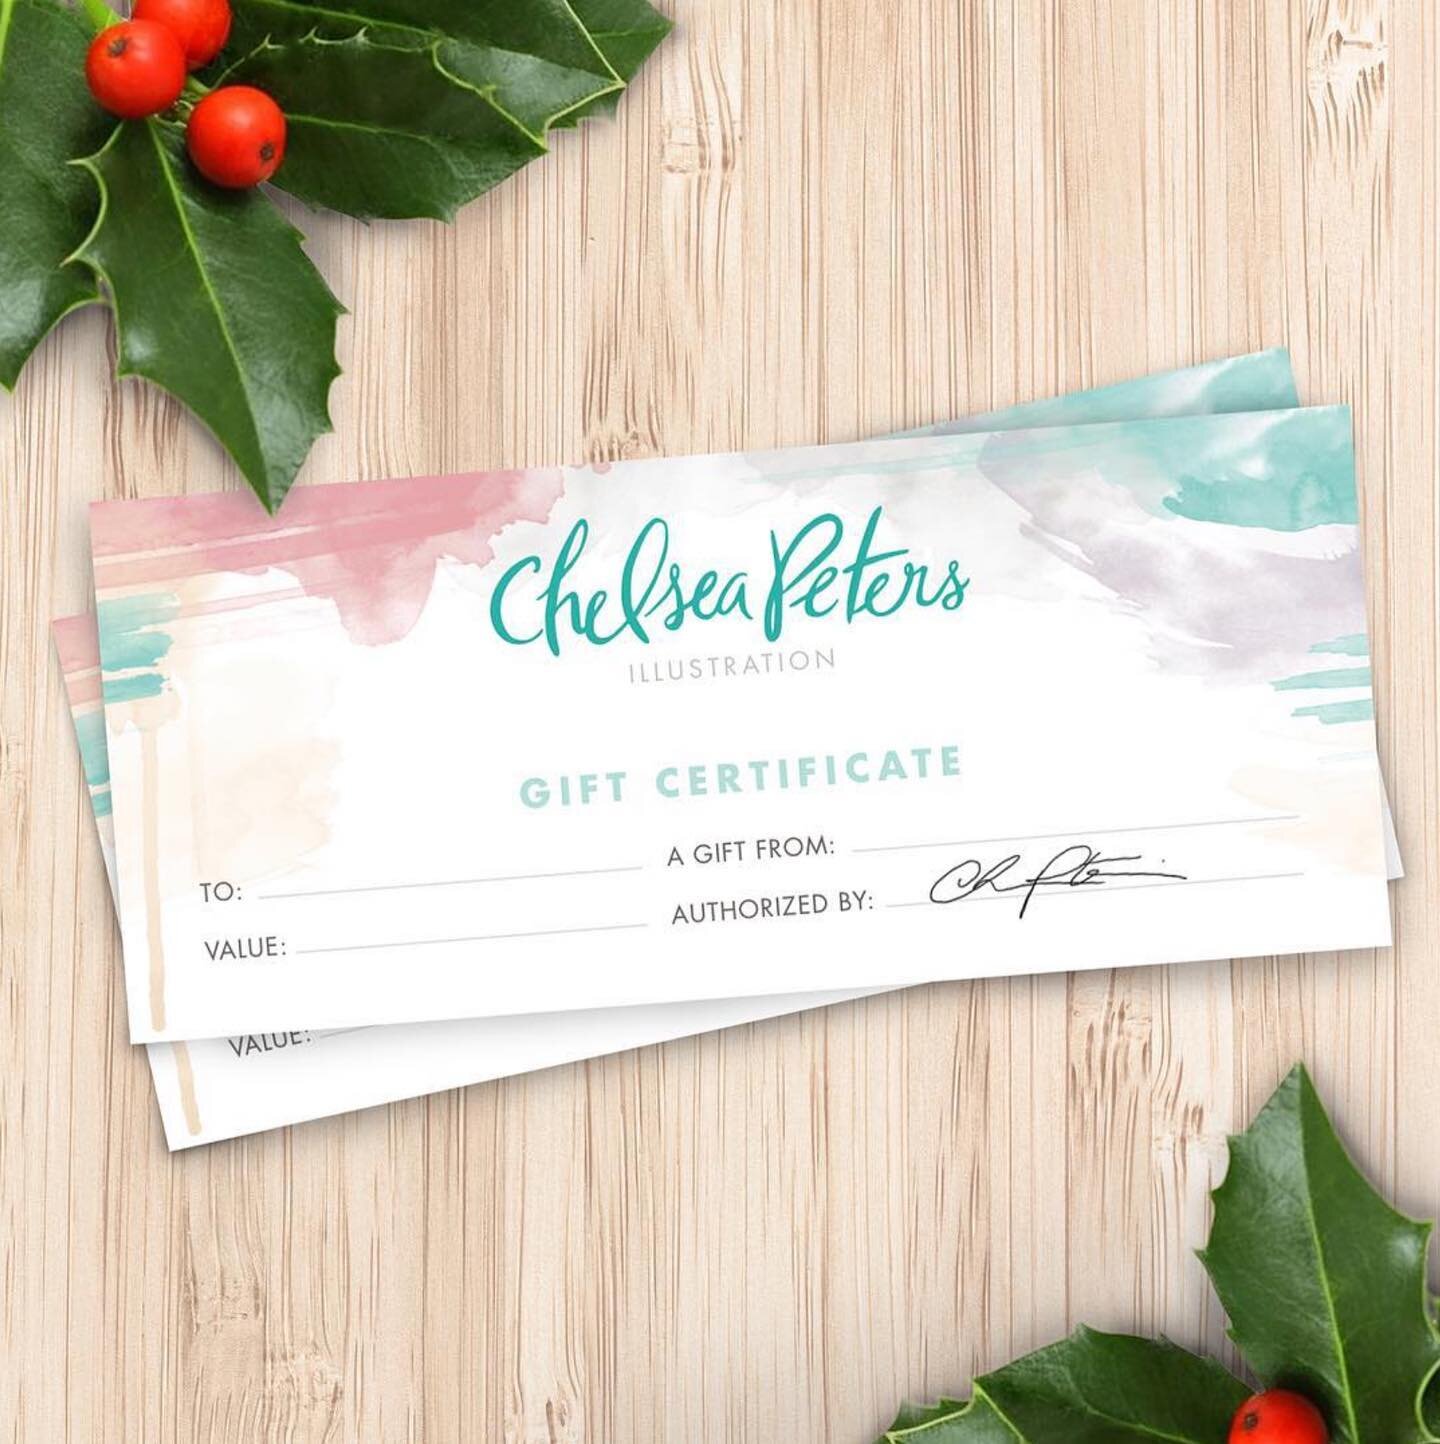 It may be too late to get a custom order before Christmas, but it&rsquo;s not too late to give the gift of an illustration of their choice! Contact me to get your gift certificate today! 🎁
.
.
.
.
.
.
.
.
.
.
#chelseapetersillustration #gifts #giftg